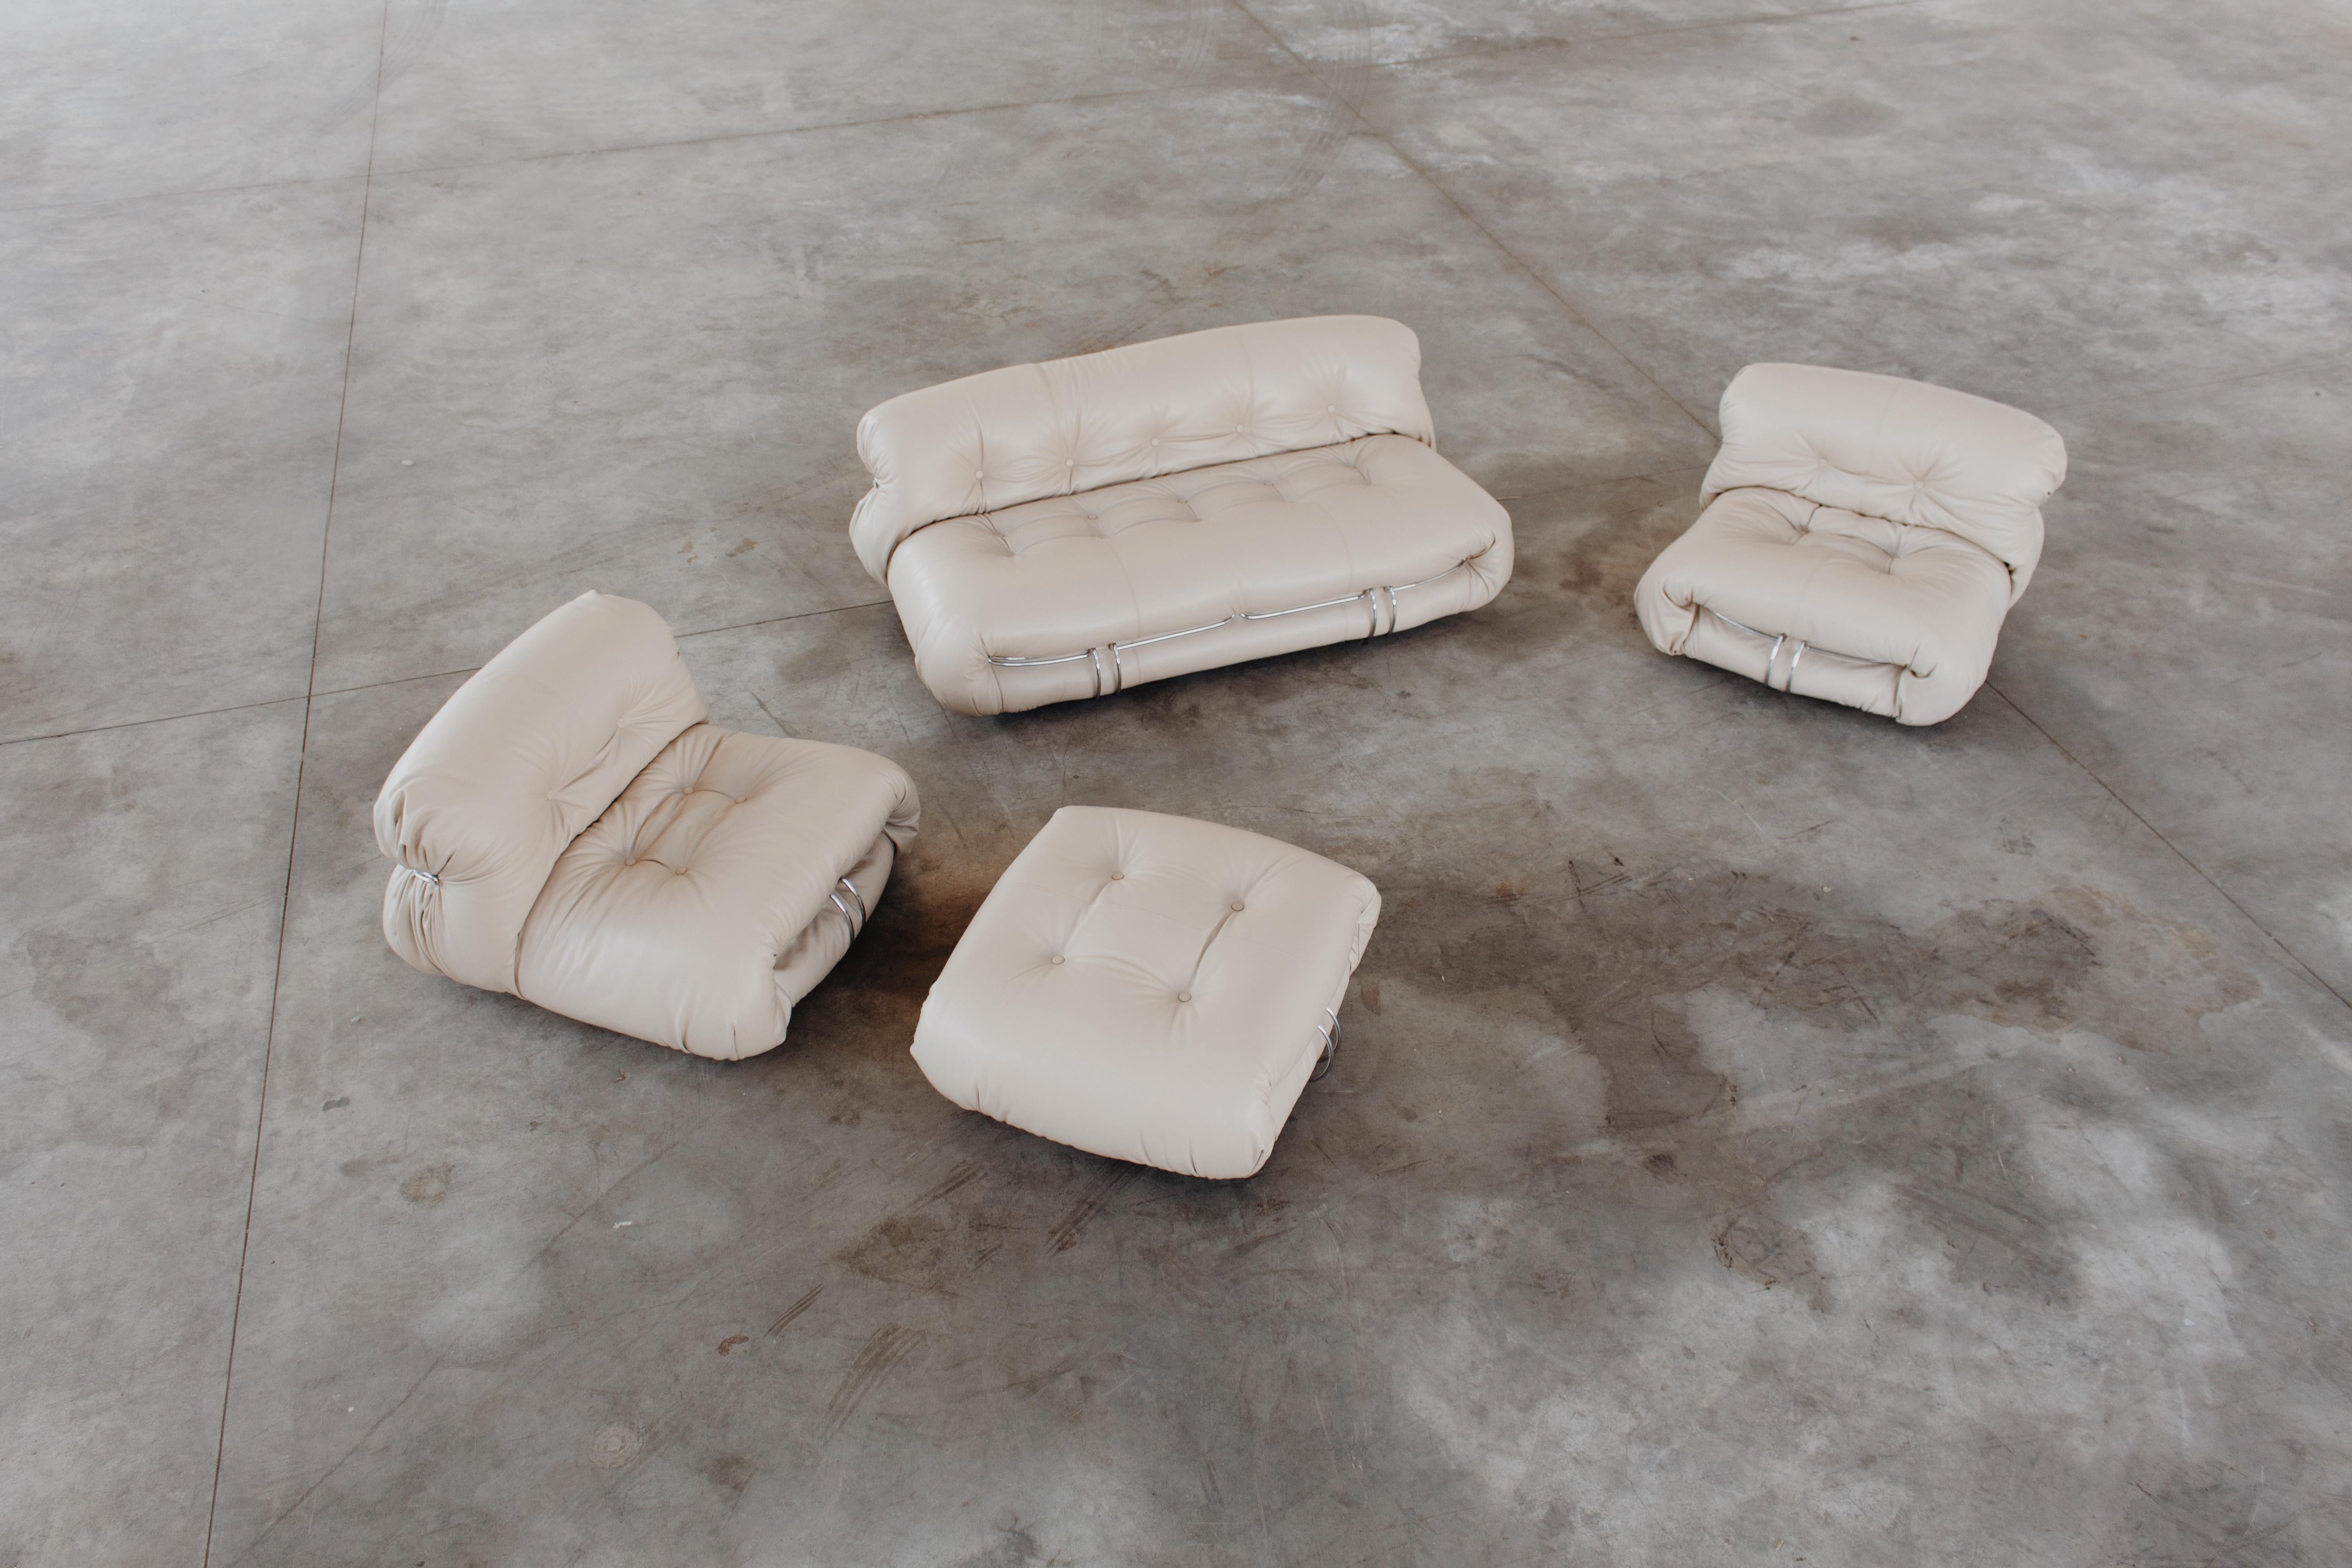 Afra & Tobia Scarpa “Soriana” living room set for Cassina, two-seater sofa, two lounge chairs and one ottoman, champagne leather, Italy, 1969, set of four. 

Although technically designed in the 1960s, the 